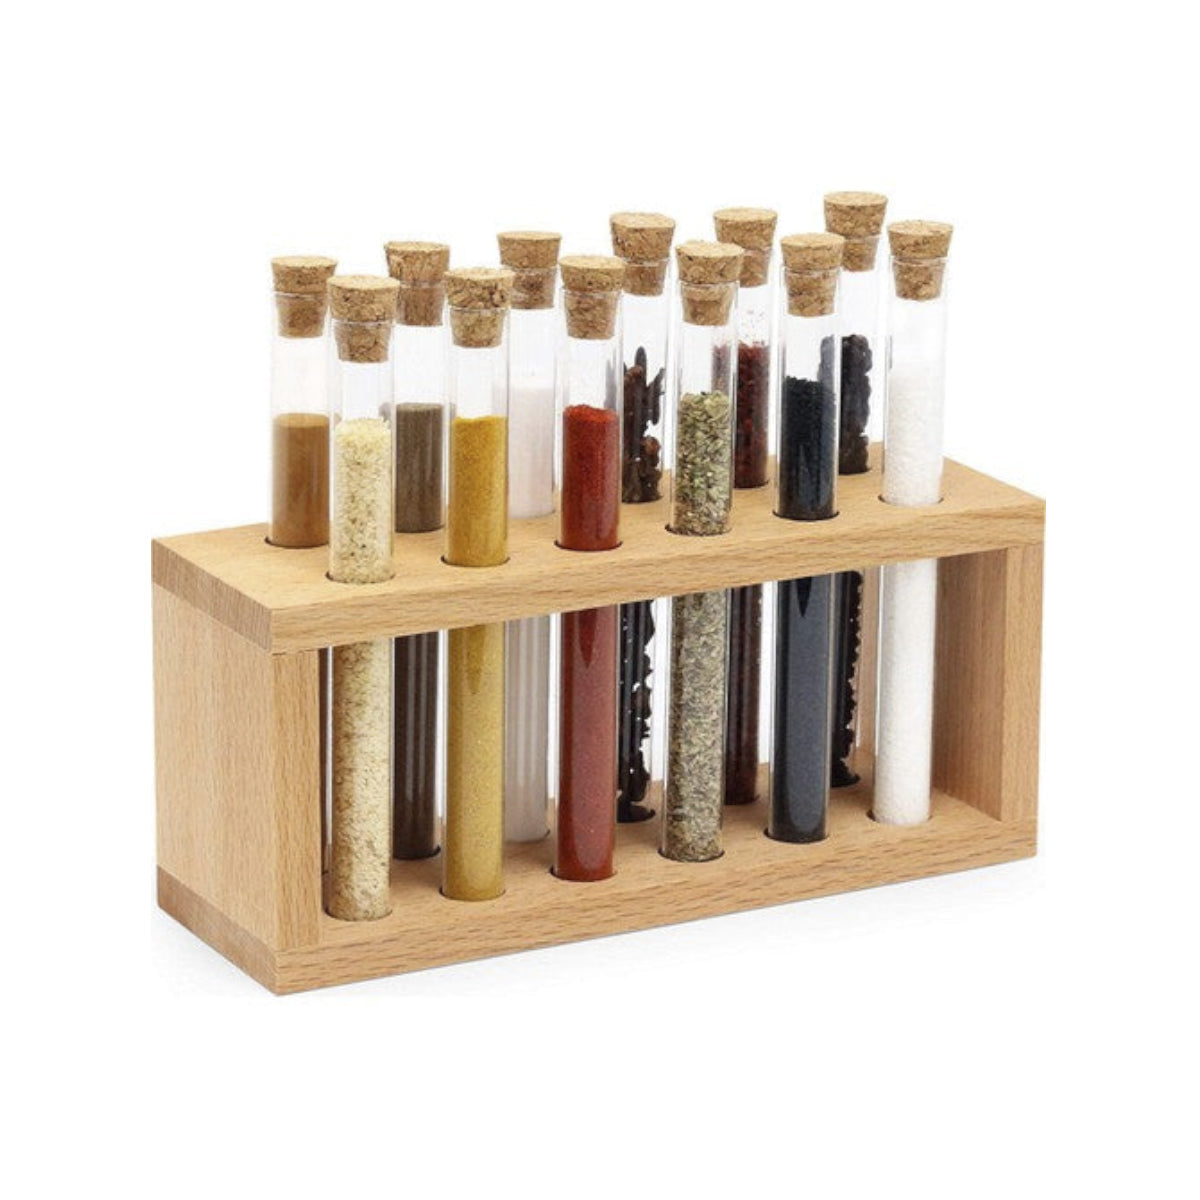 Test-Tube Styled Spices Cellars Set